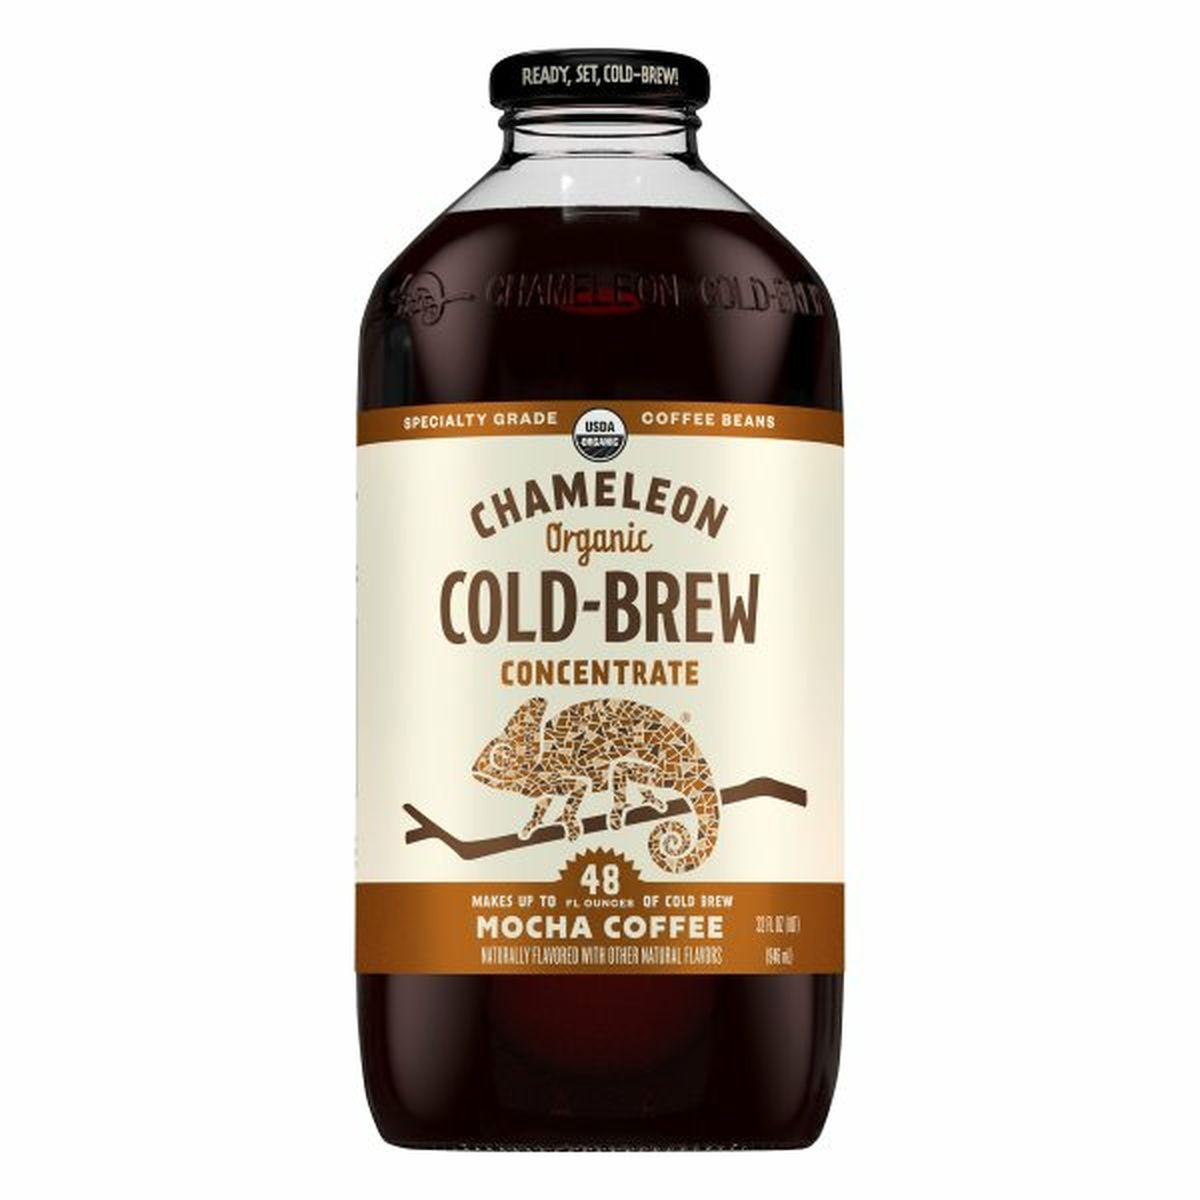 Calories in Chameleon Cold-Brew Coffee, Organic, Concentrate, Mocha, Cold-Brew